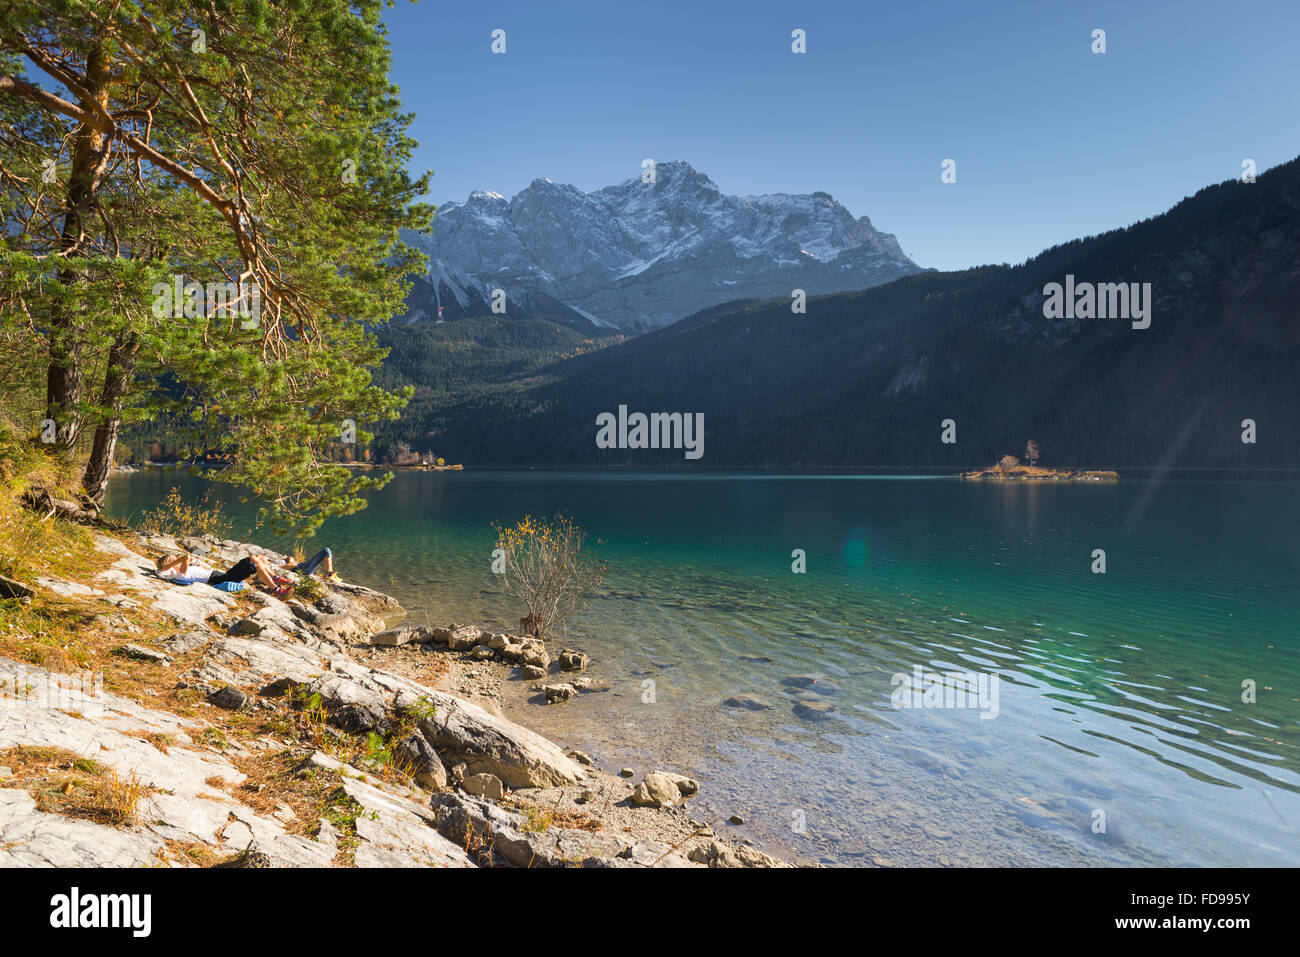 Two women sunbathing at lake Eibsee, snow covered Wetterstein mountains and autumn forests,Garmisch-Partenkirchen, Germany Stock Photo